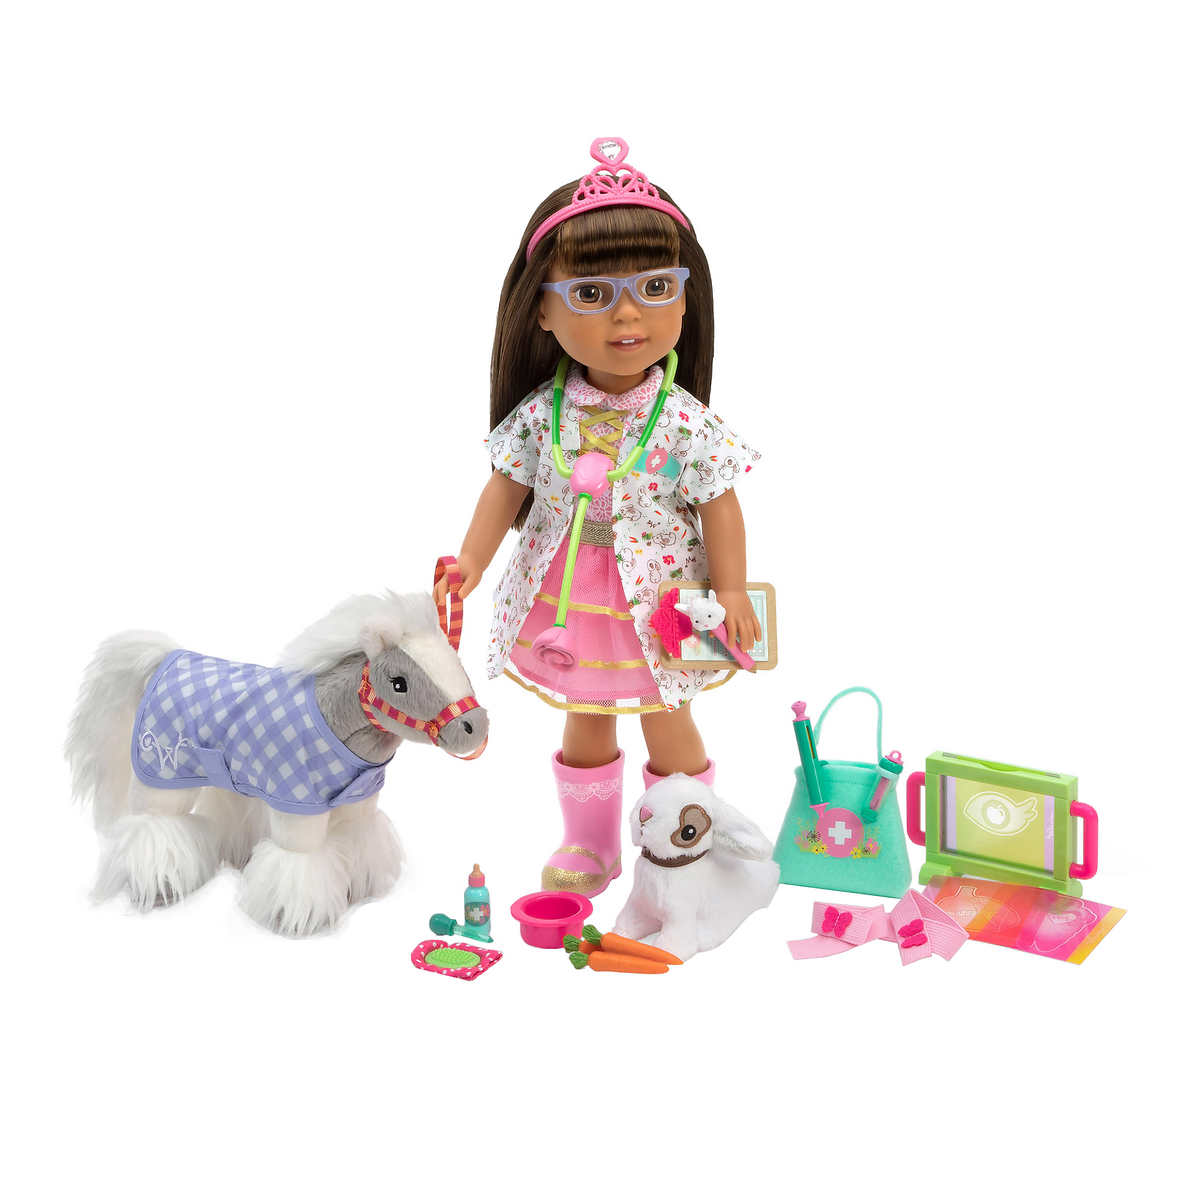 American Girl Doll Sets from $79.99 at Costco (In Store & Online)